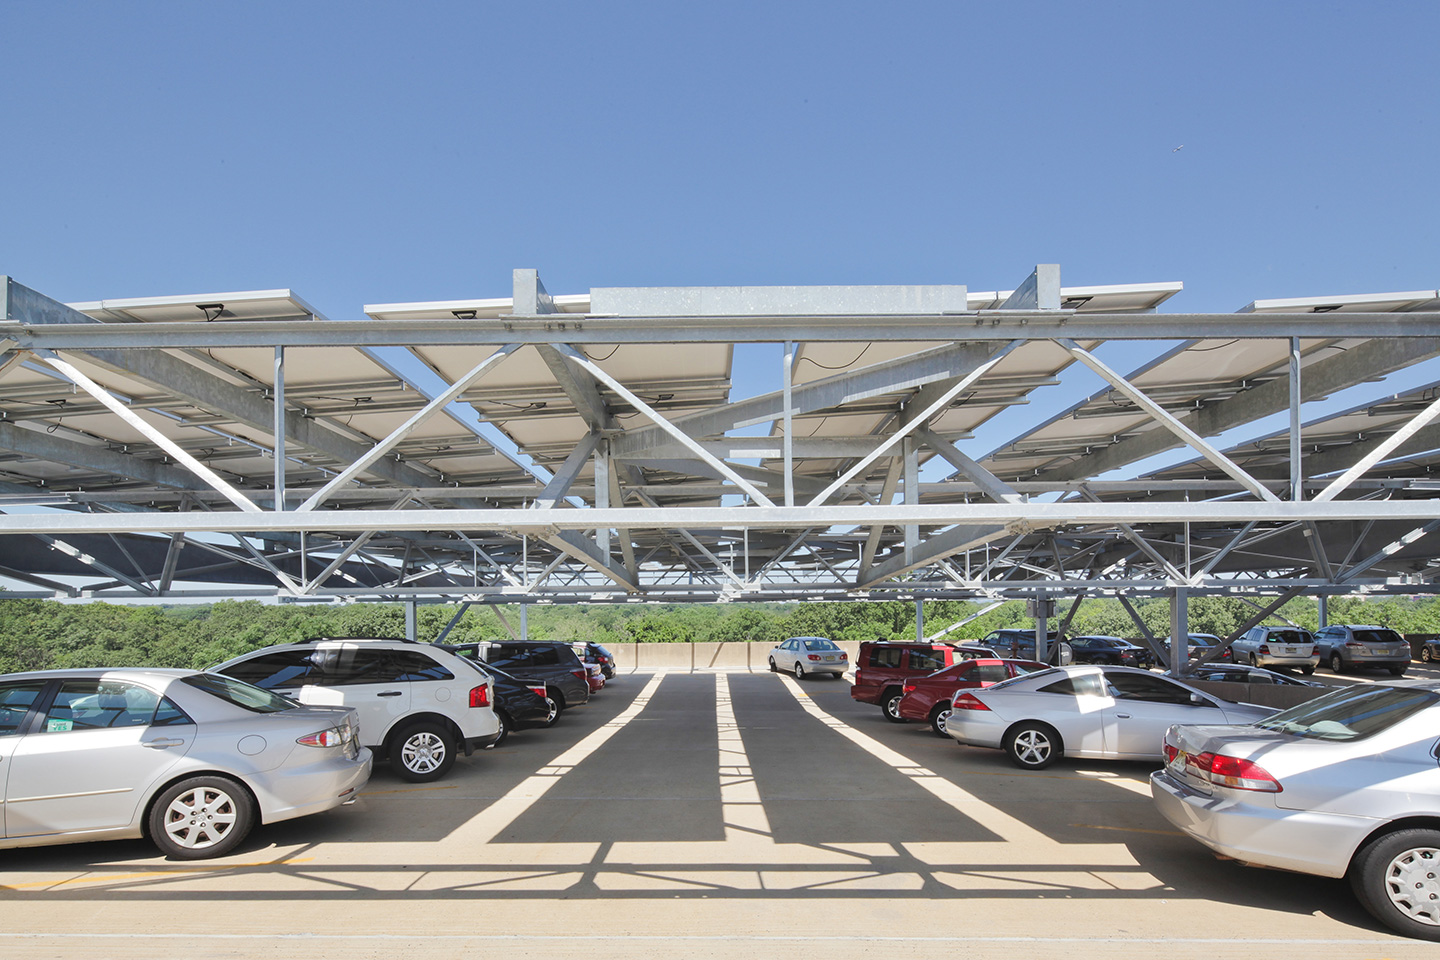 Canopy solar systems serve a dual purpose of collecting solar power while also providing shade and weather protection for the cars beneath. 